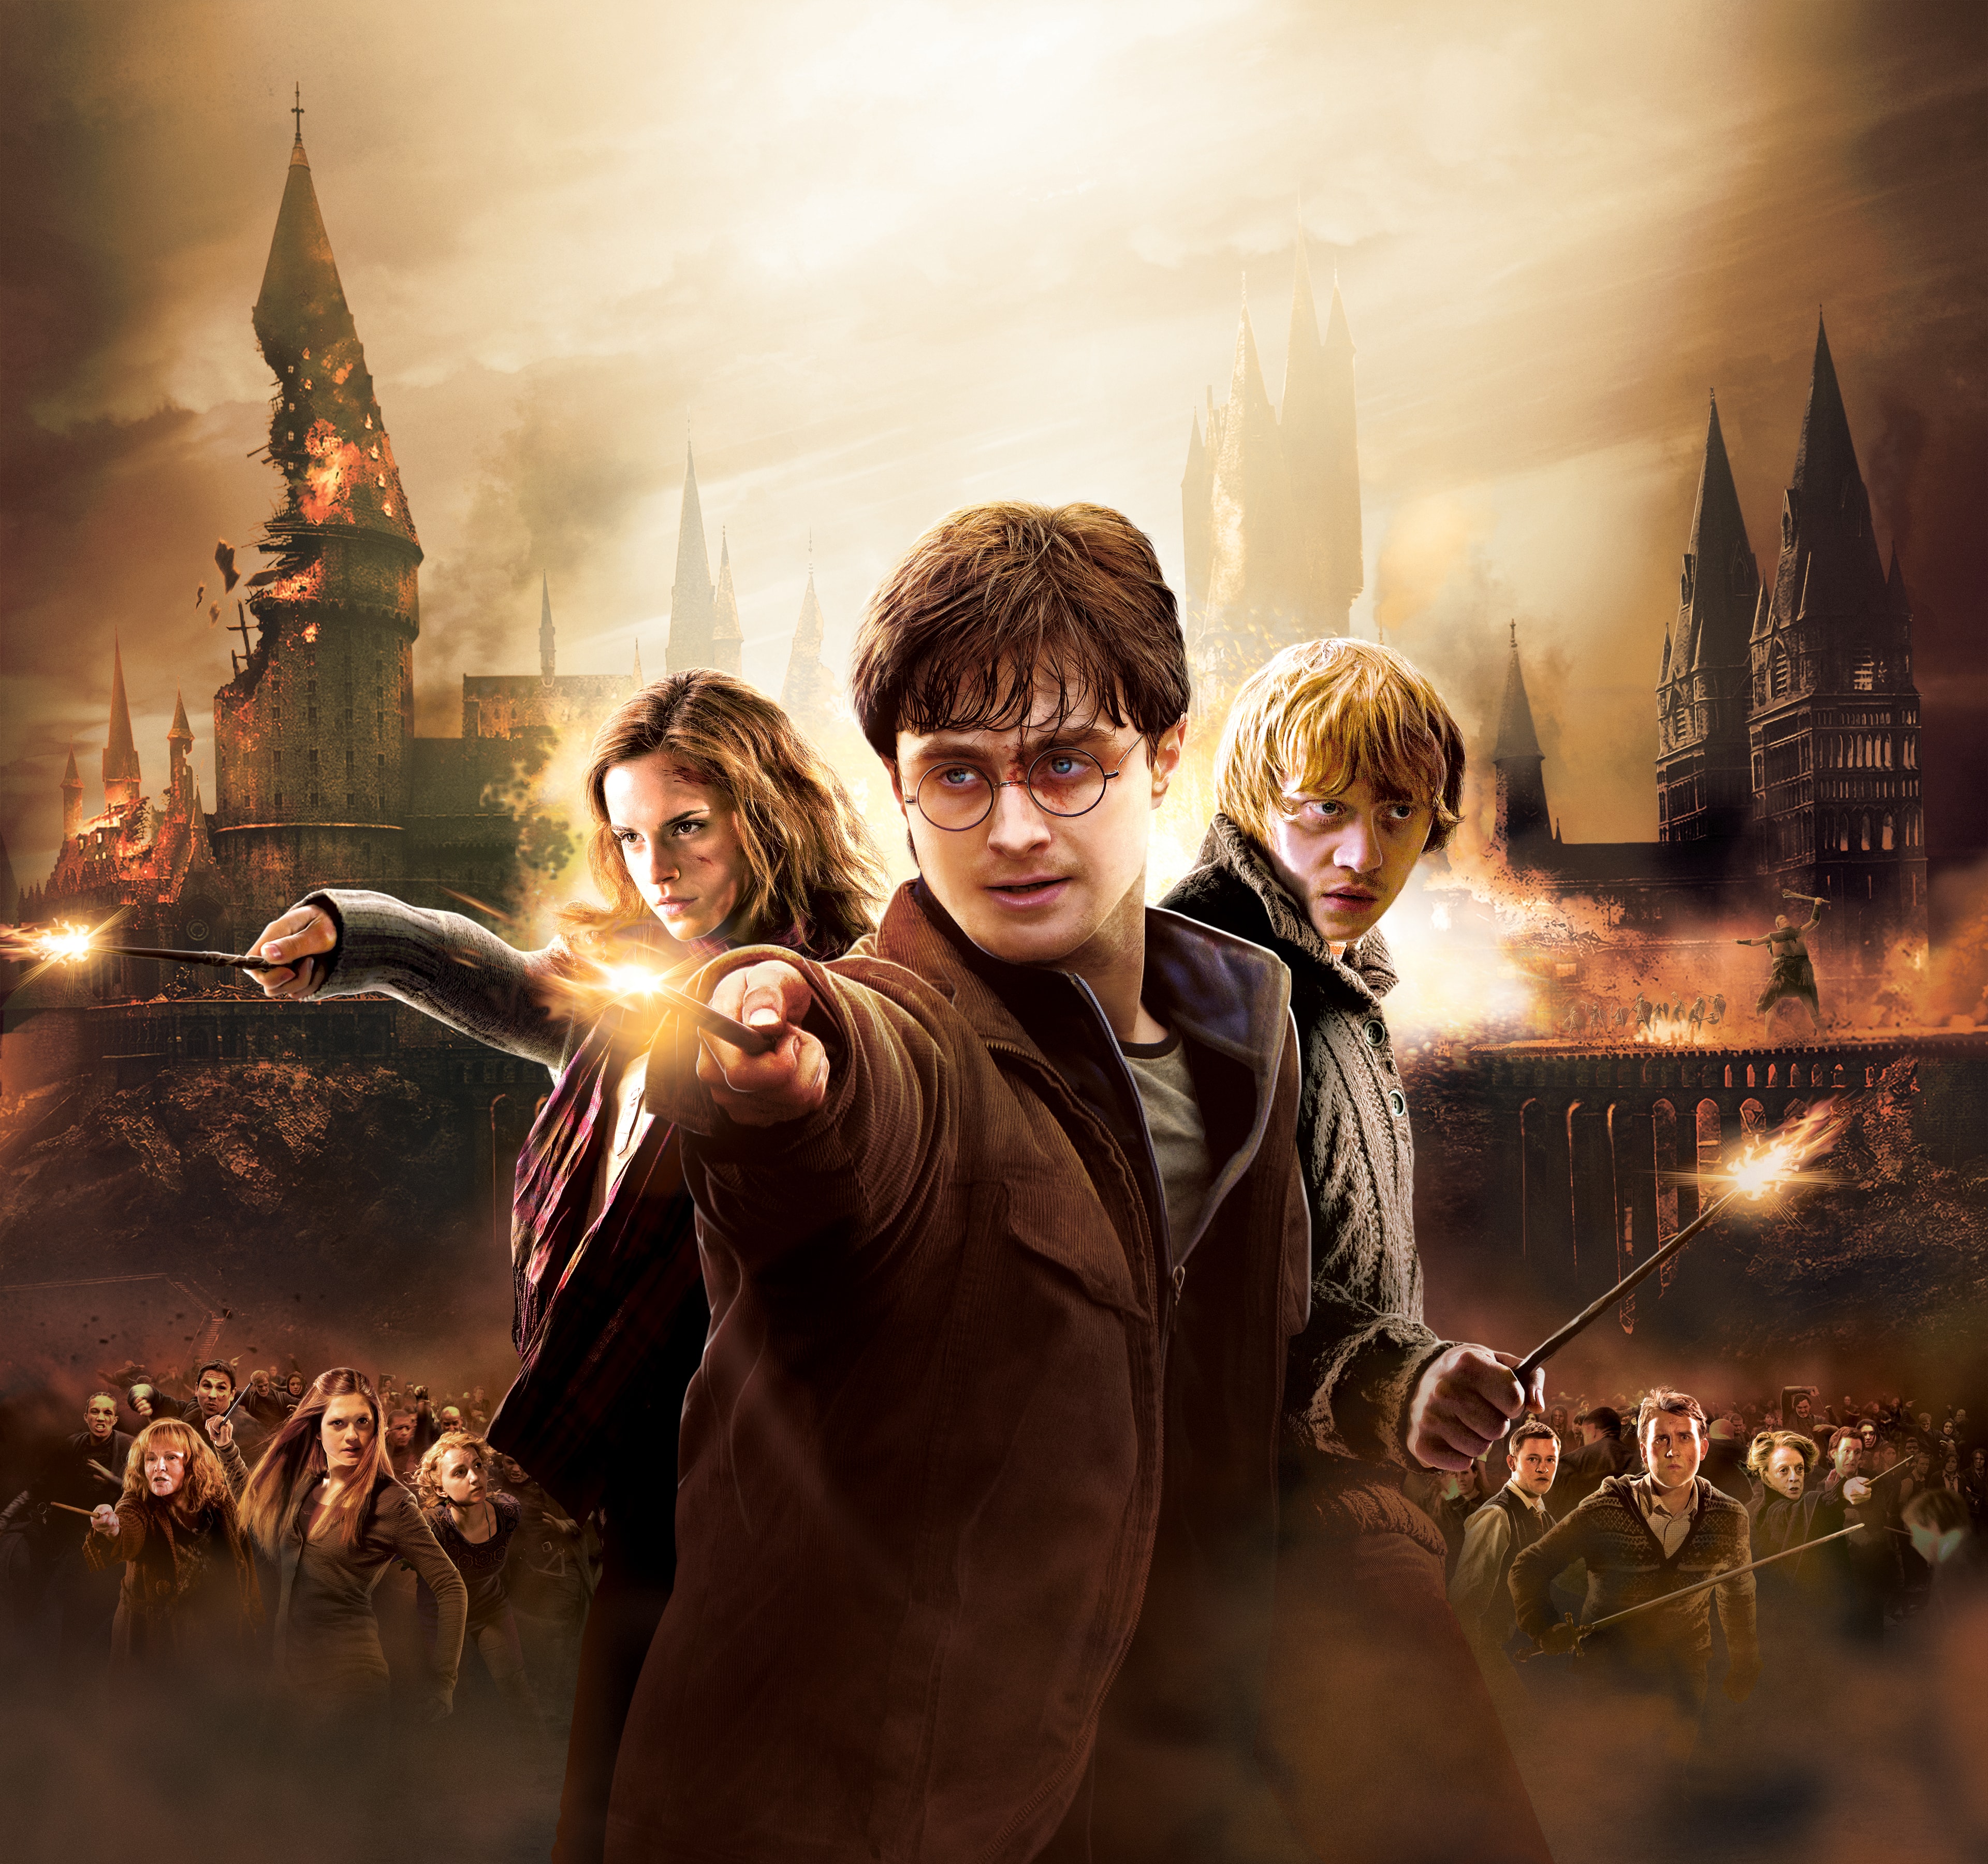 harry potter deathly hallows part 2 duration